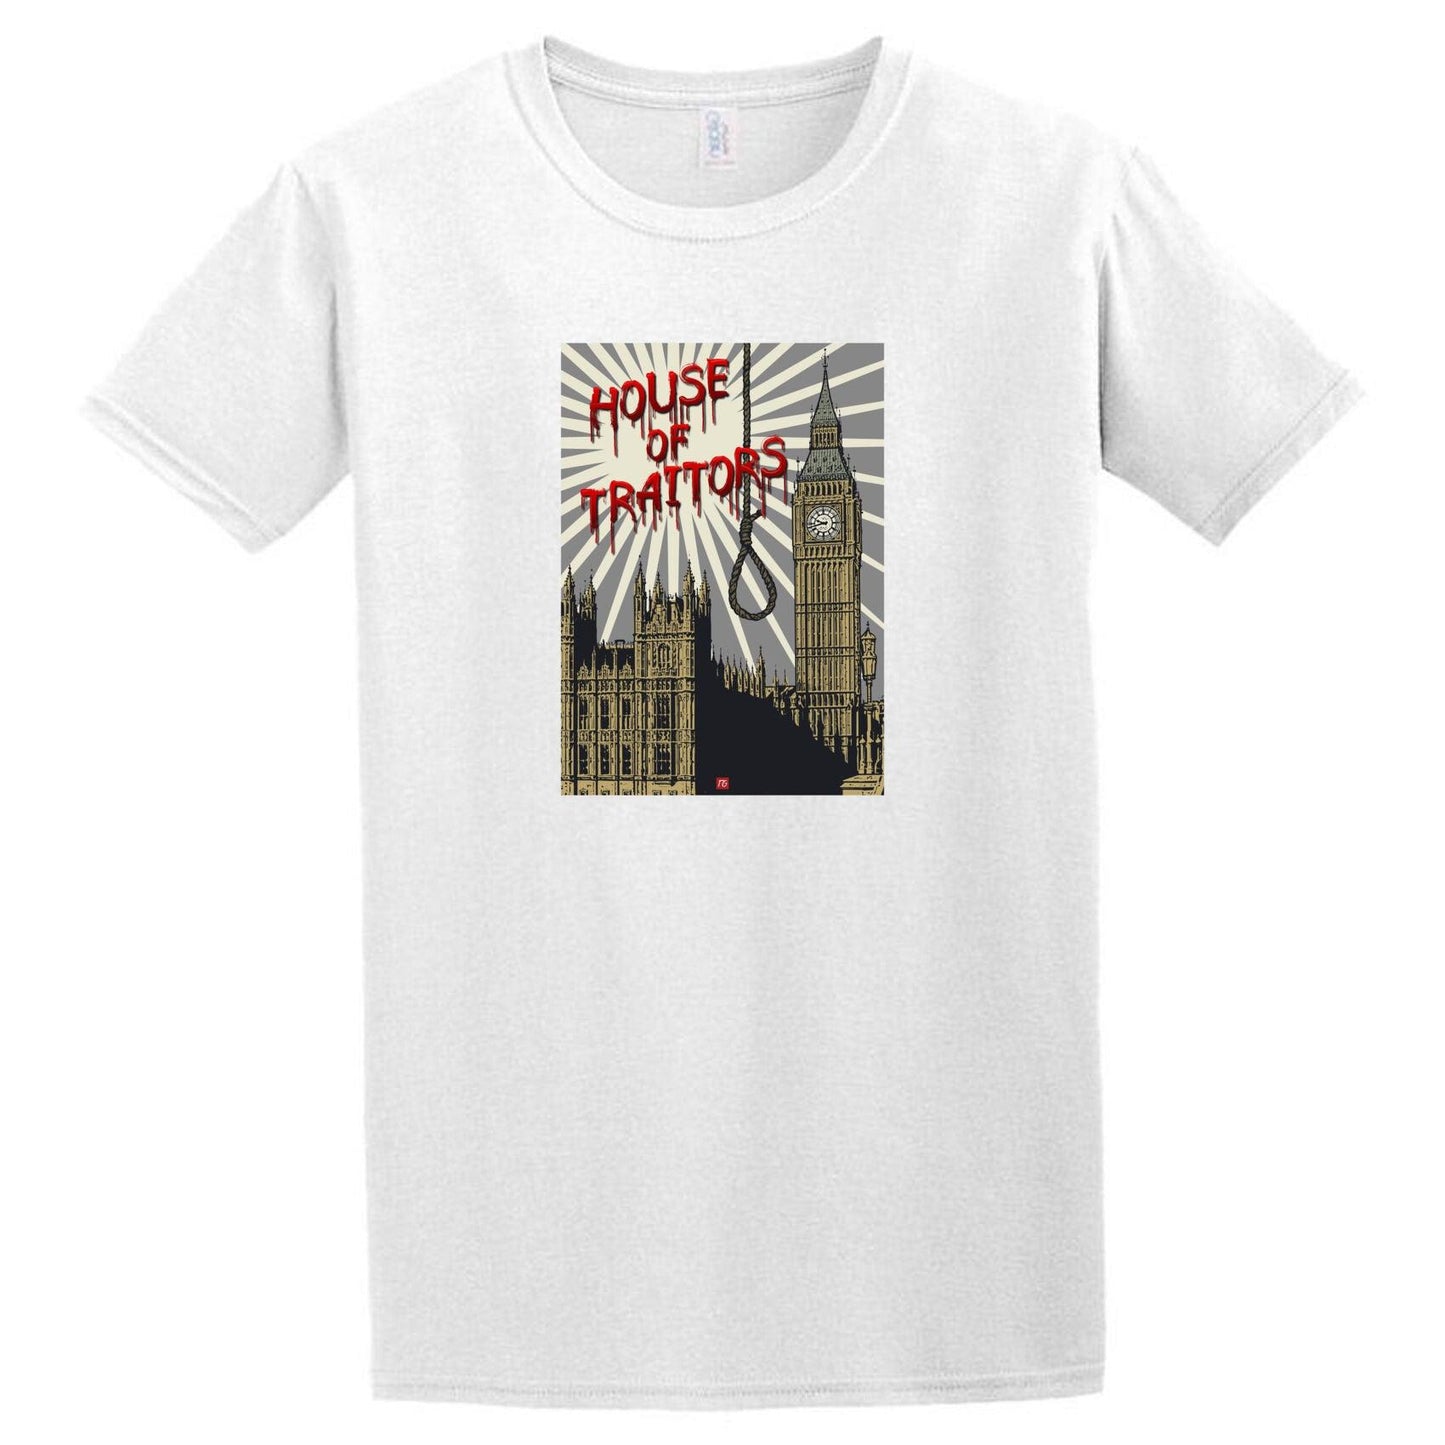 A Traitors T-Shirt from Twisted Gifts with an image of London's Big Ben.